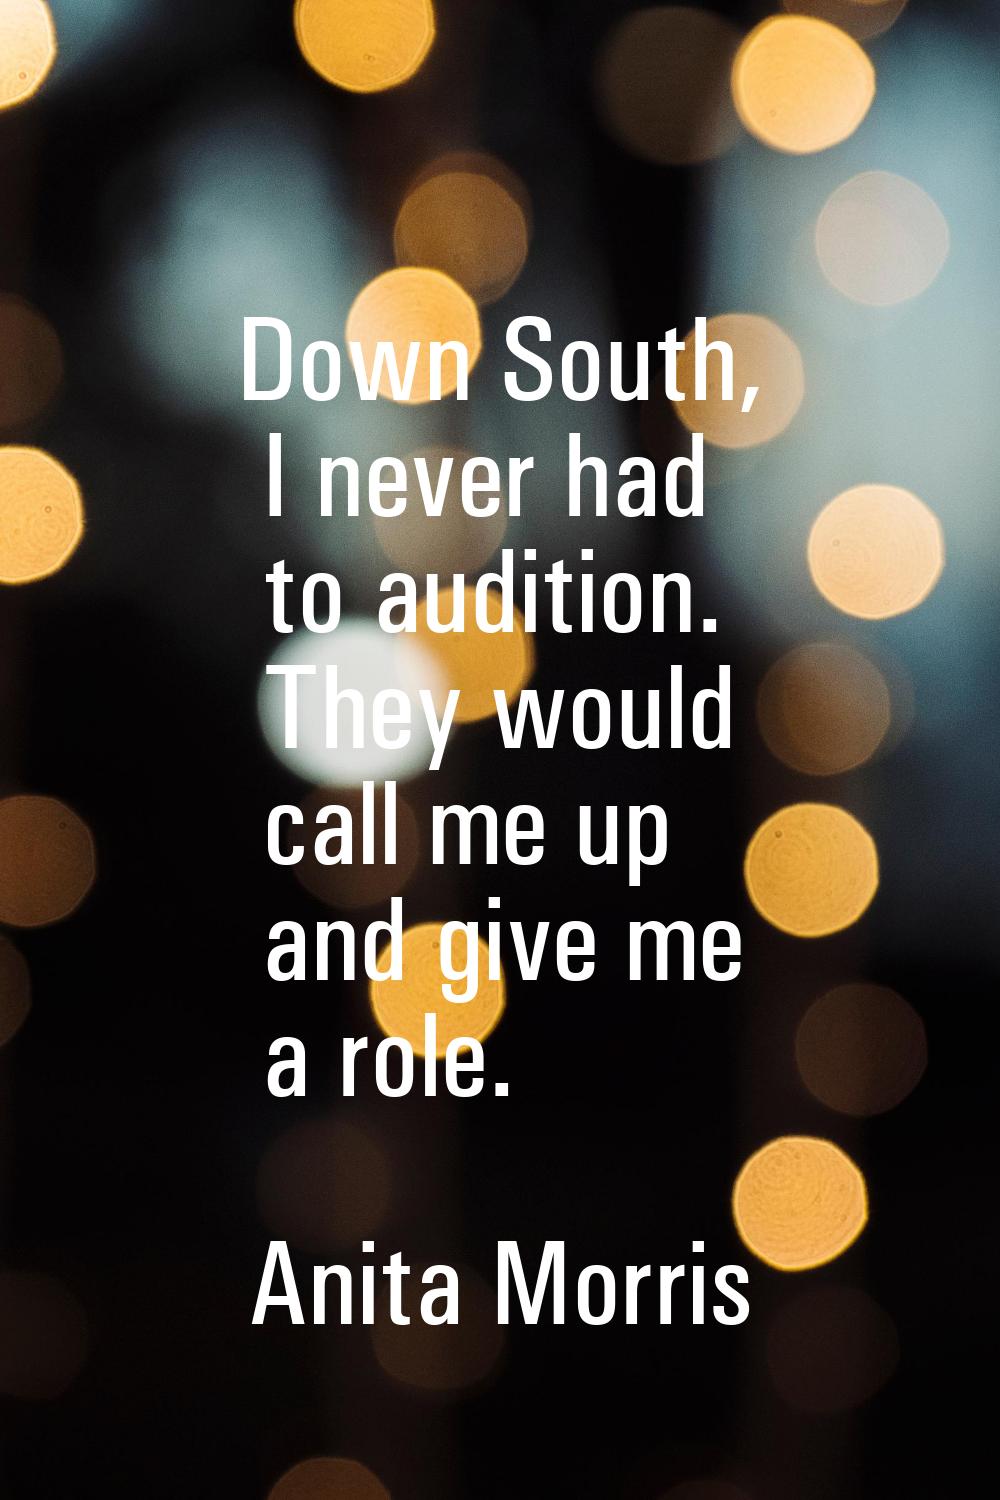 Down South, I never had to audition. They would call me up and give me a role.